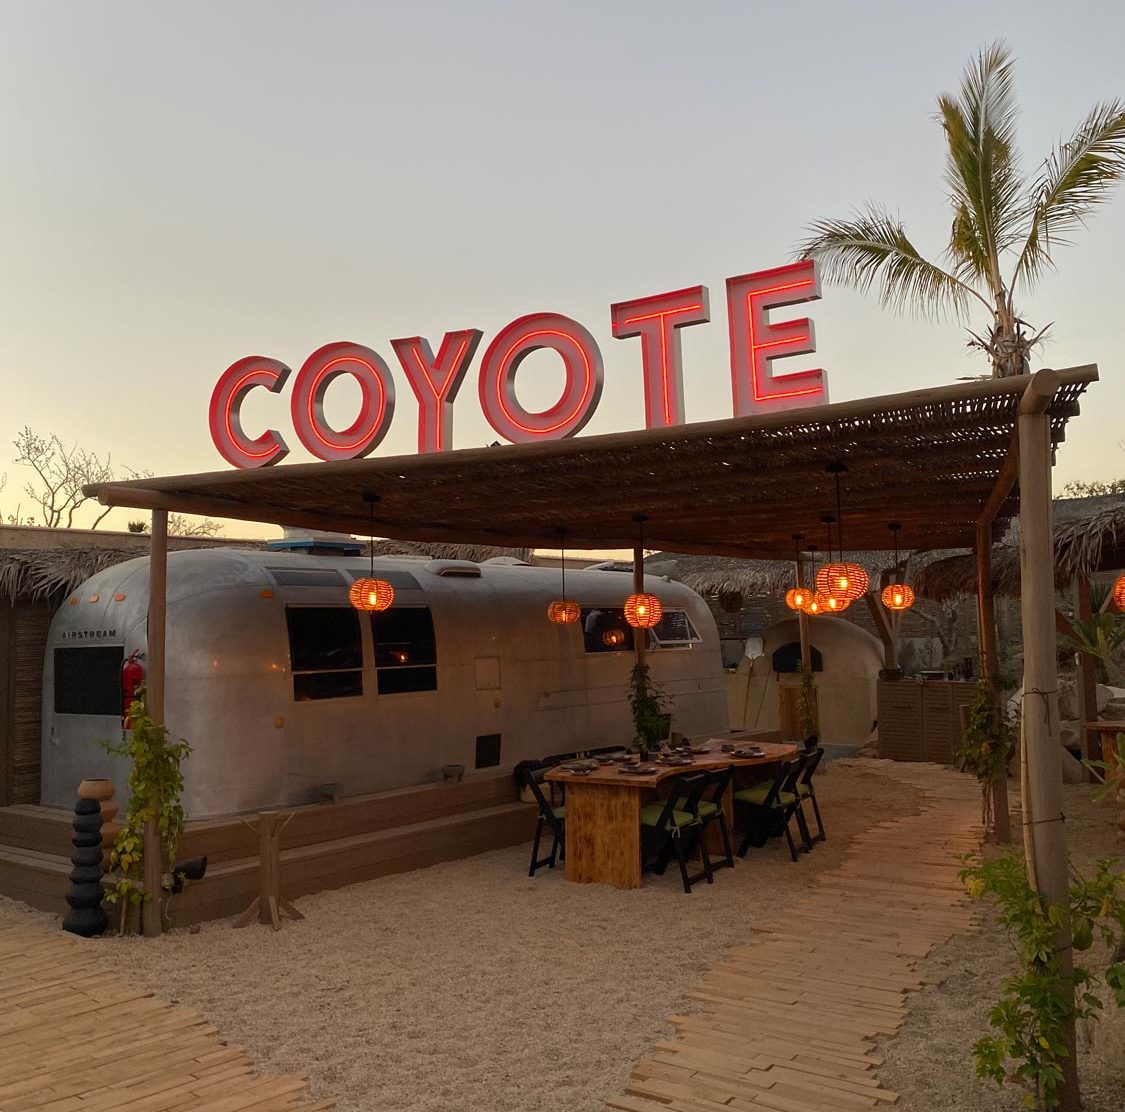 El Perdido Dinner at Coyote Canyon, hands down the best food in the area